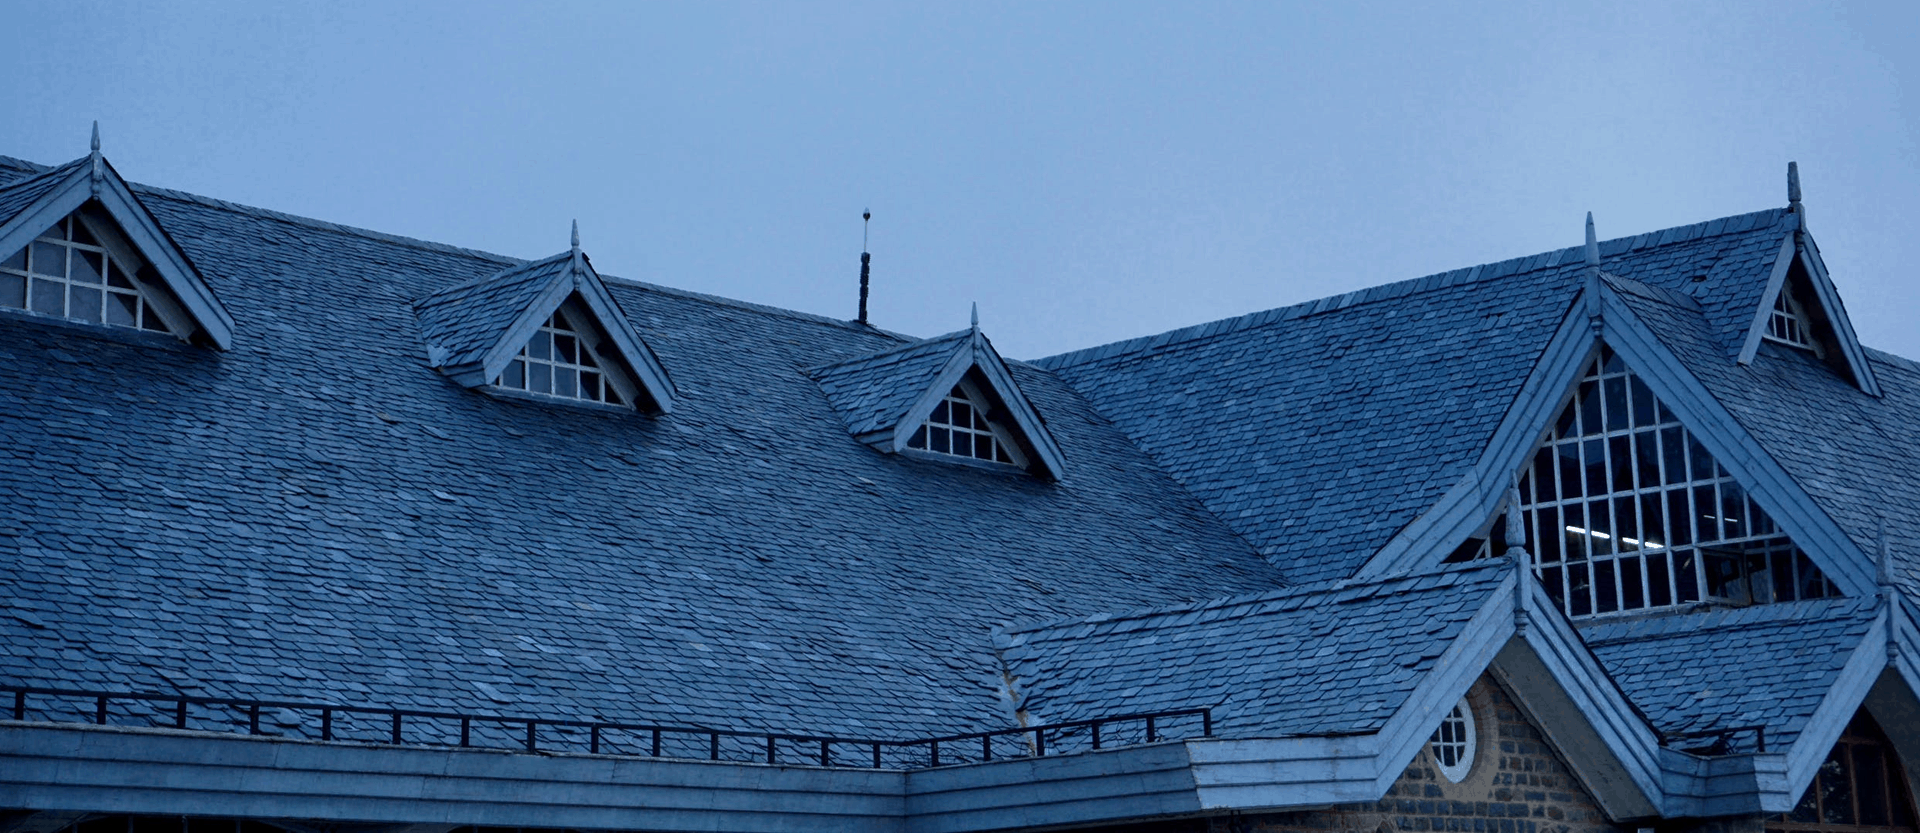 Photo of a large roof with shingles and gutter guards, taken at twilight